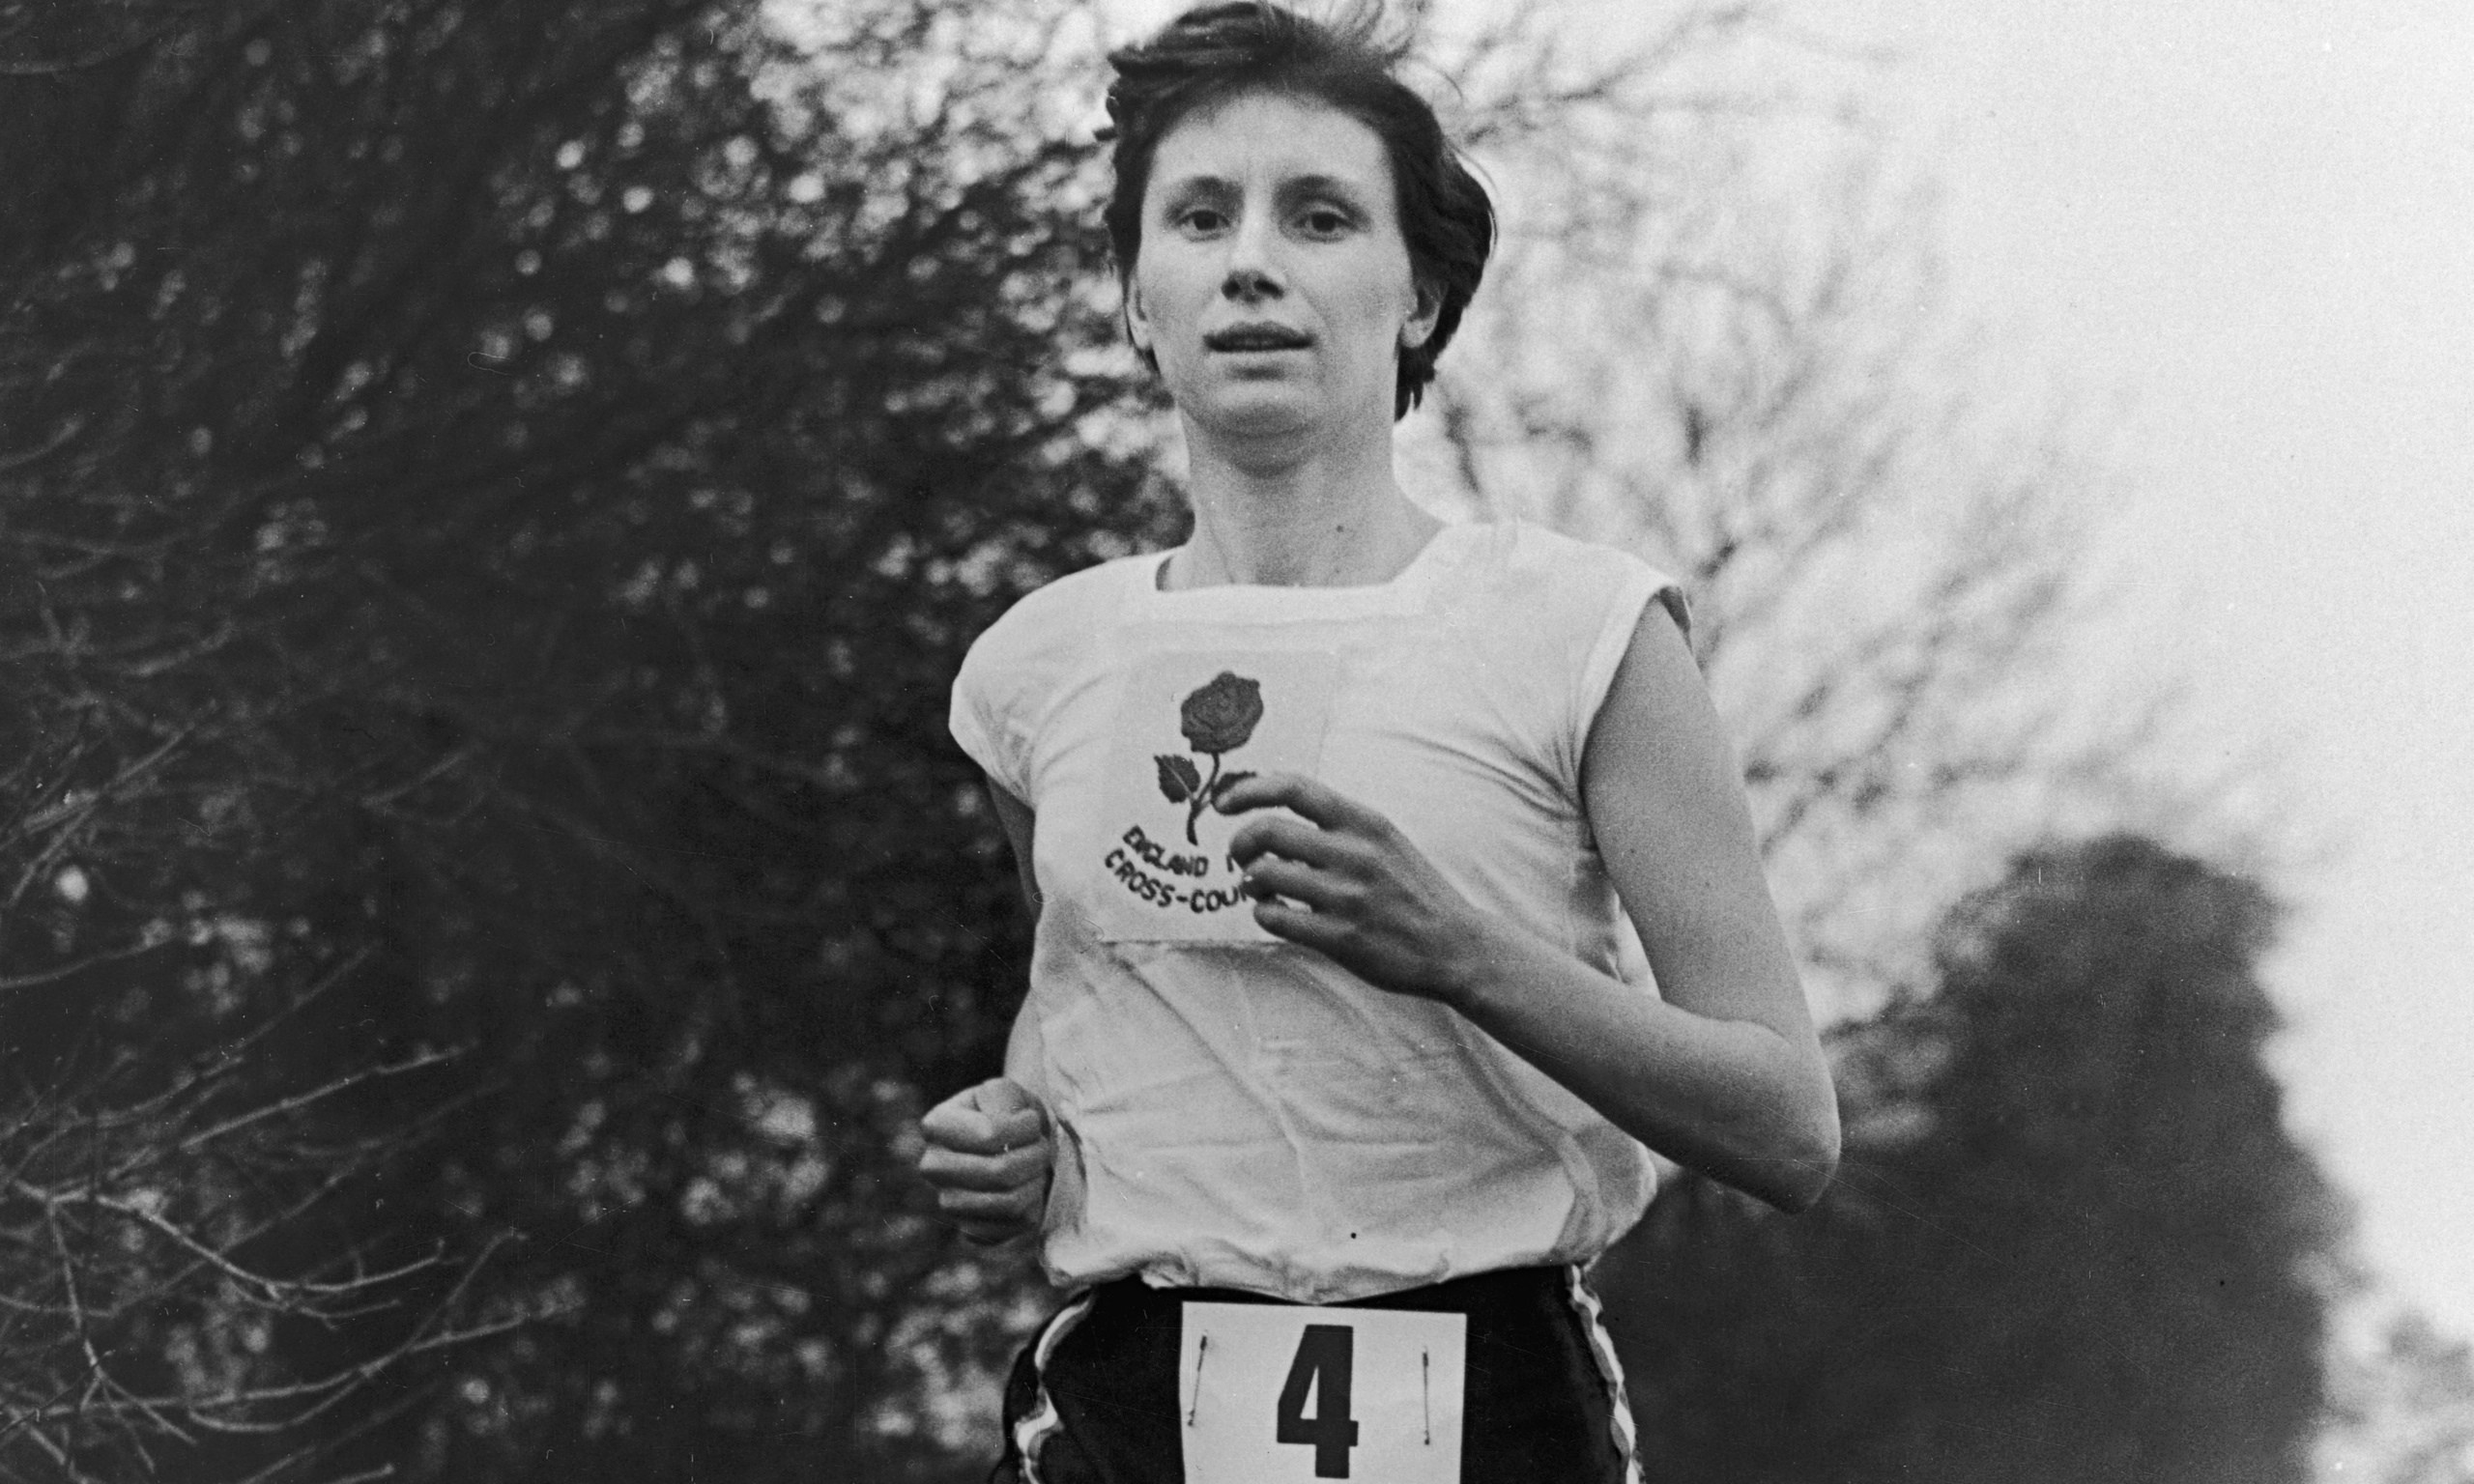 Diane Leather Ran Sub 5 minute Mile In 1954